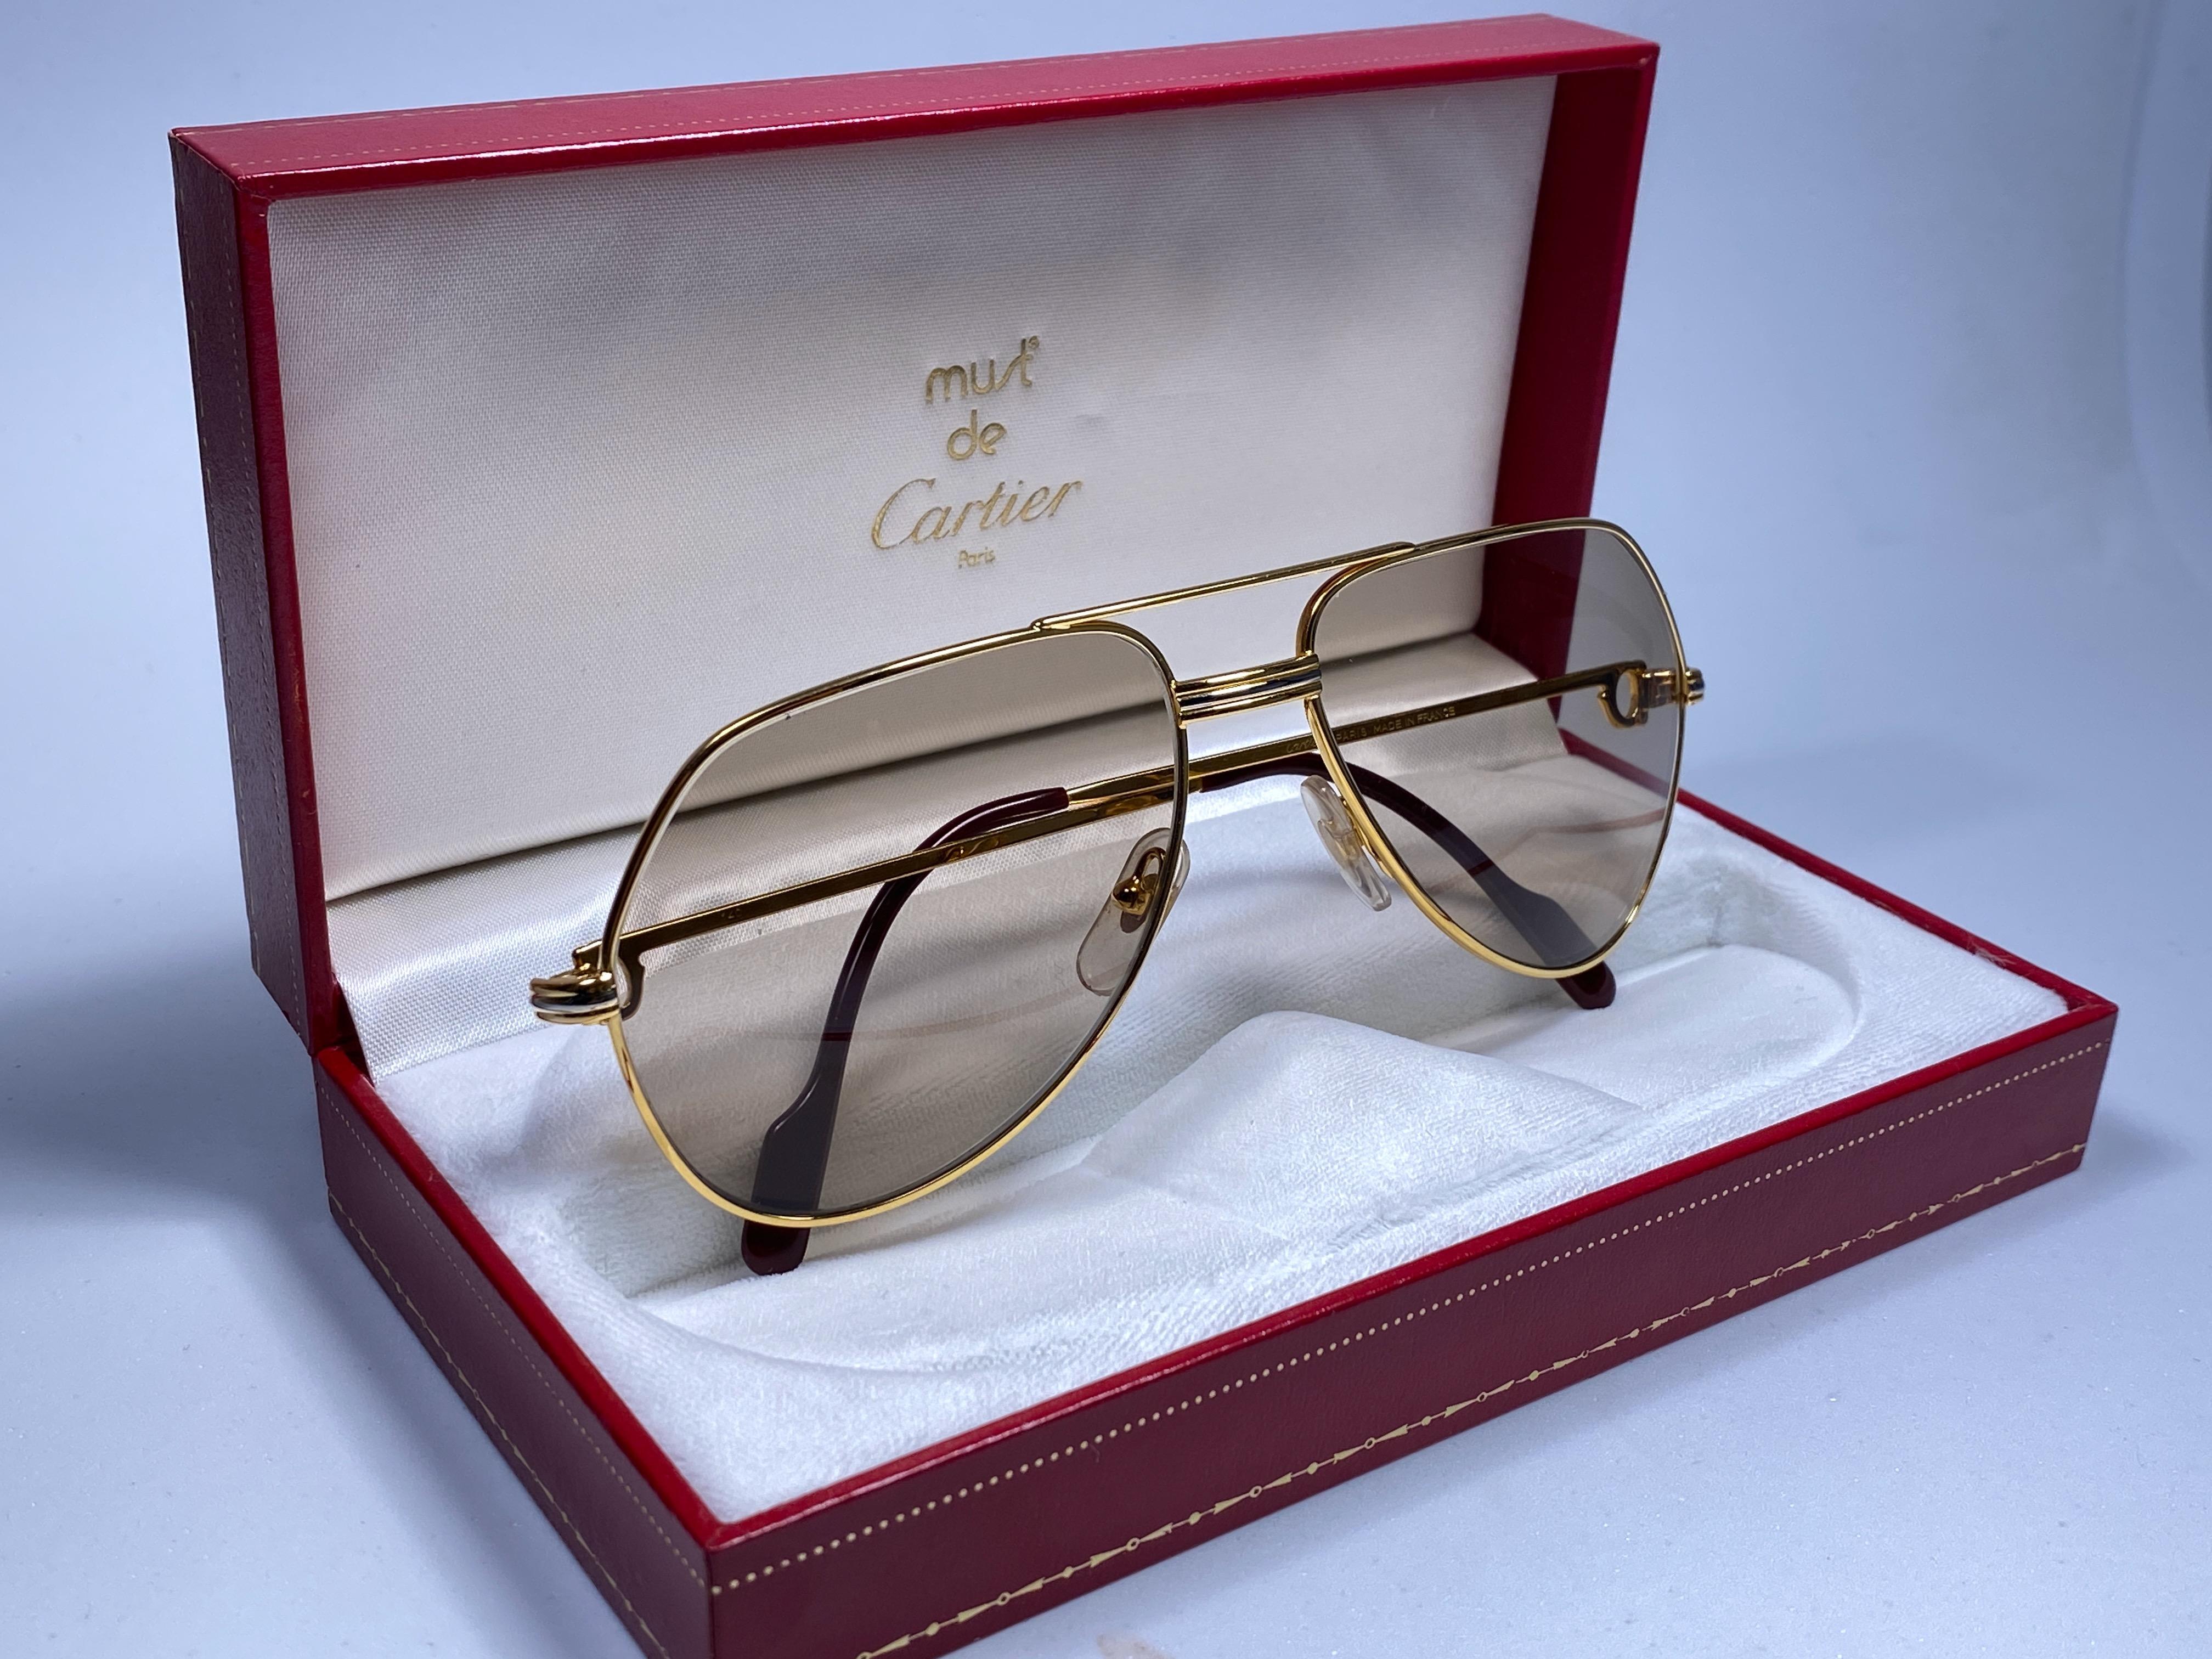 New from 1983!!! Cartier Aviator Vendome 59MM Heavy plated gold sunglasses with light brown  (uv protection) Lenses.  Frame is with the famous Vendome stripes on the front and sides in yellow and white gold. 
All hallmarks. 
Red enamel with Cartier